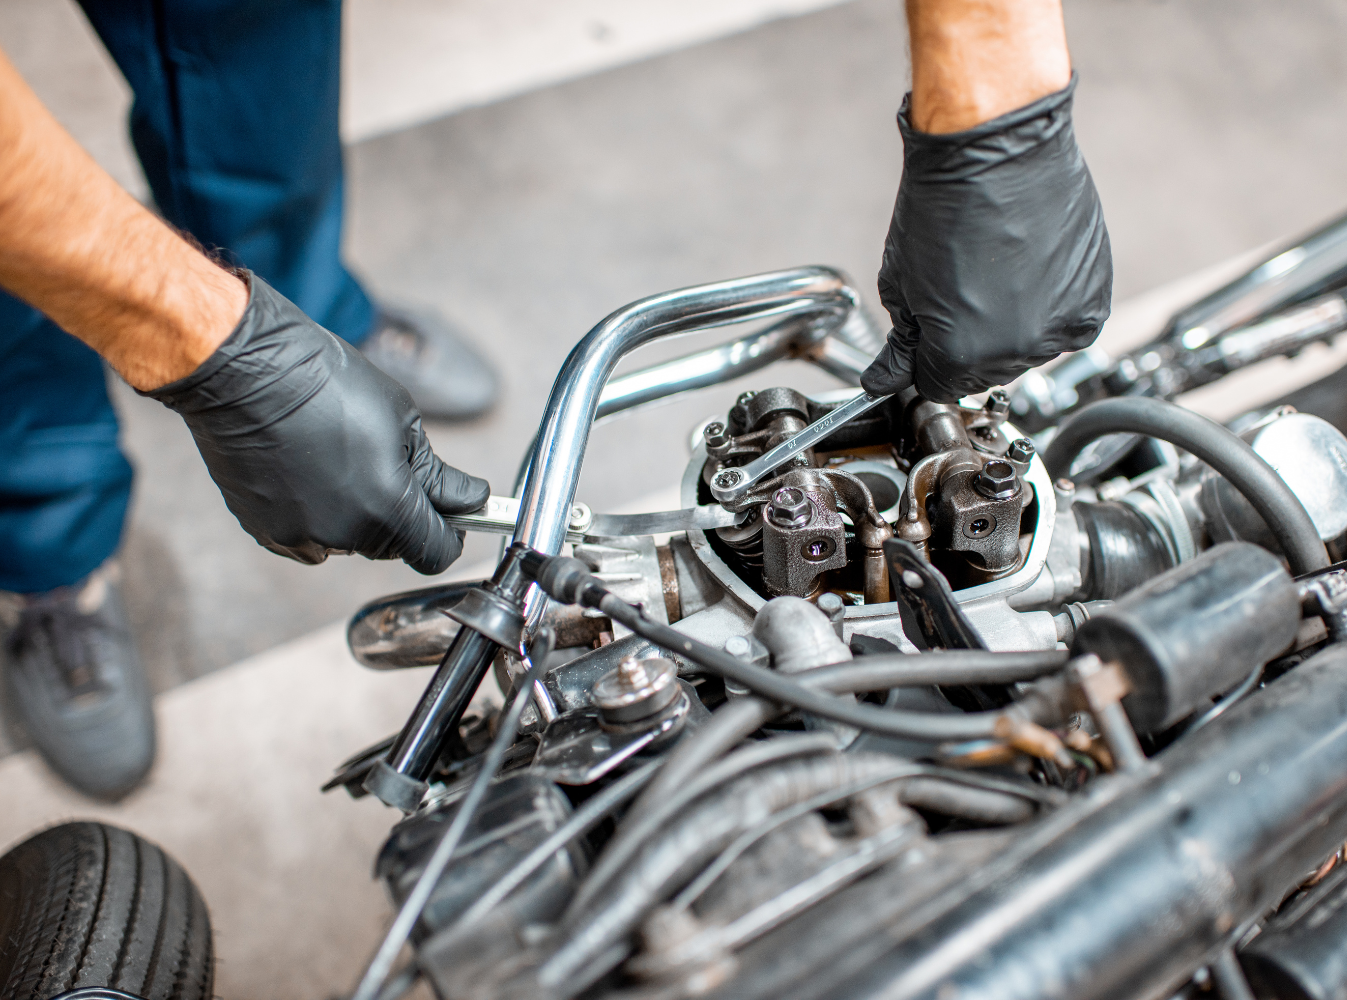 a person with black gloves working on a motorcycle engine